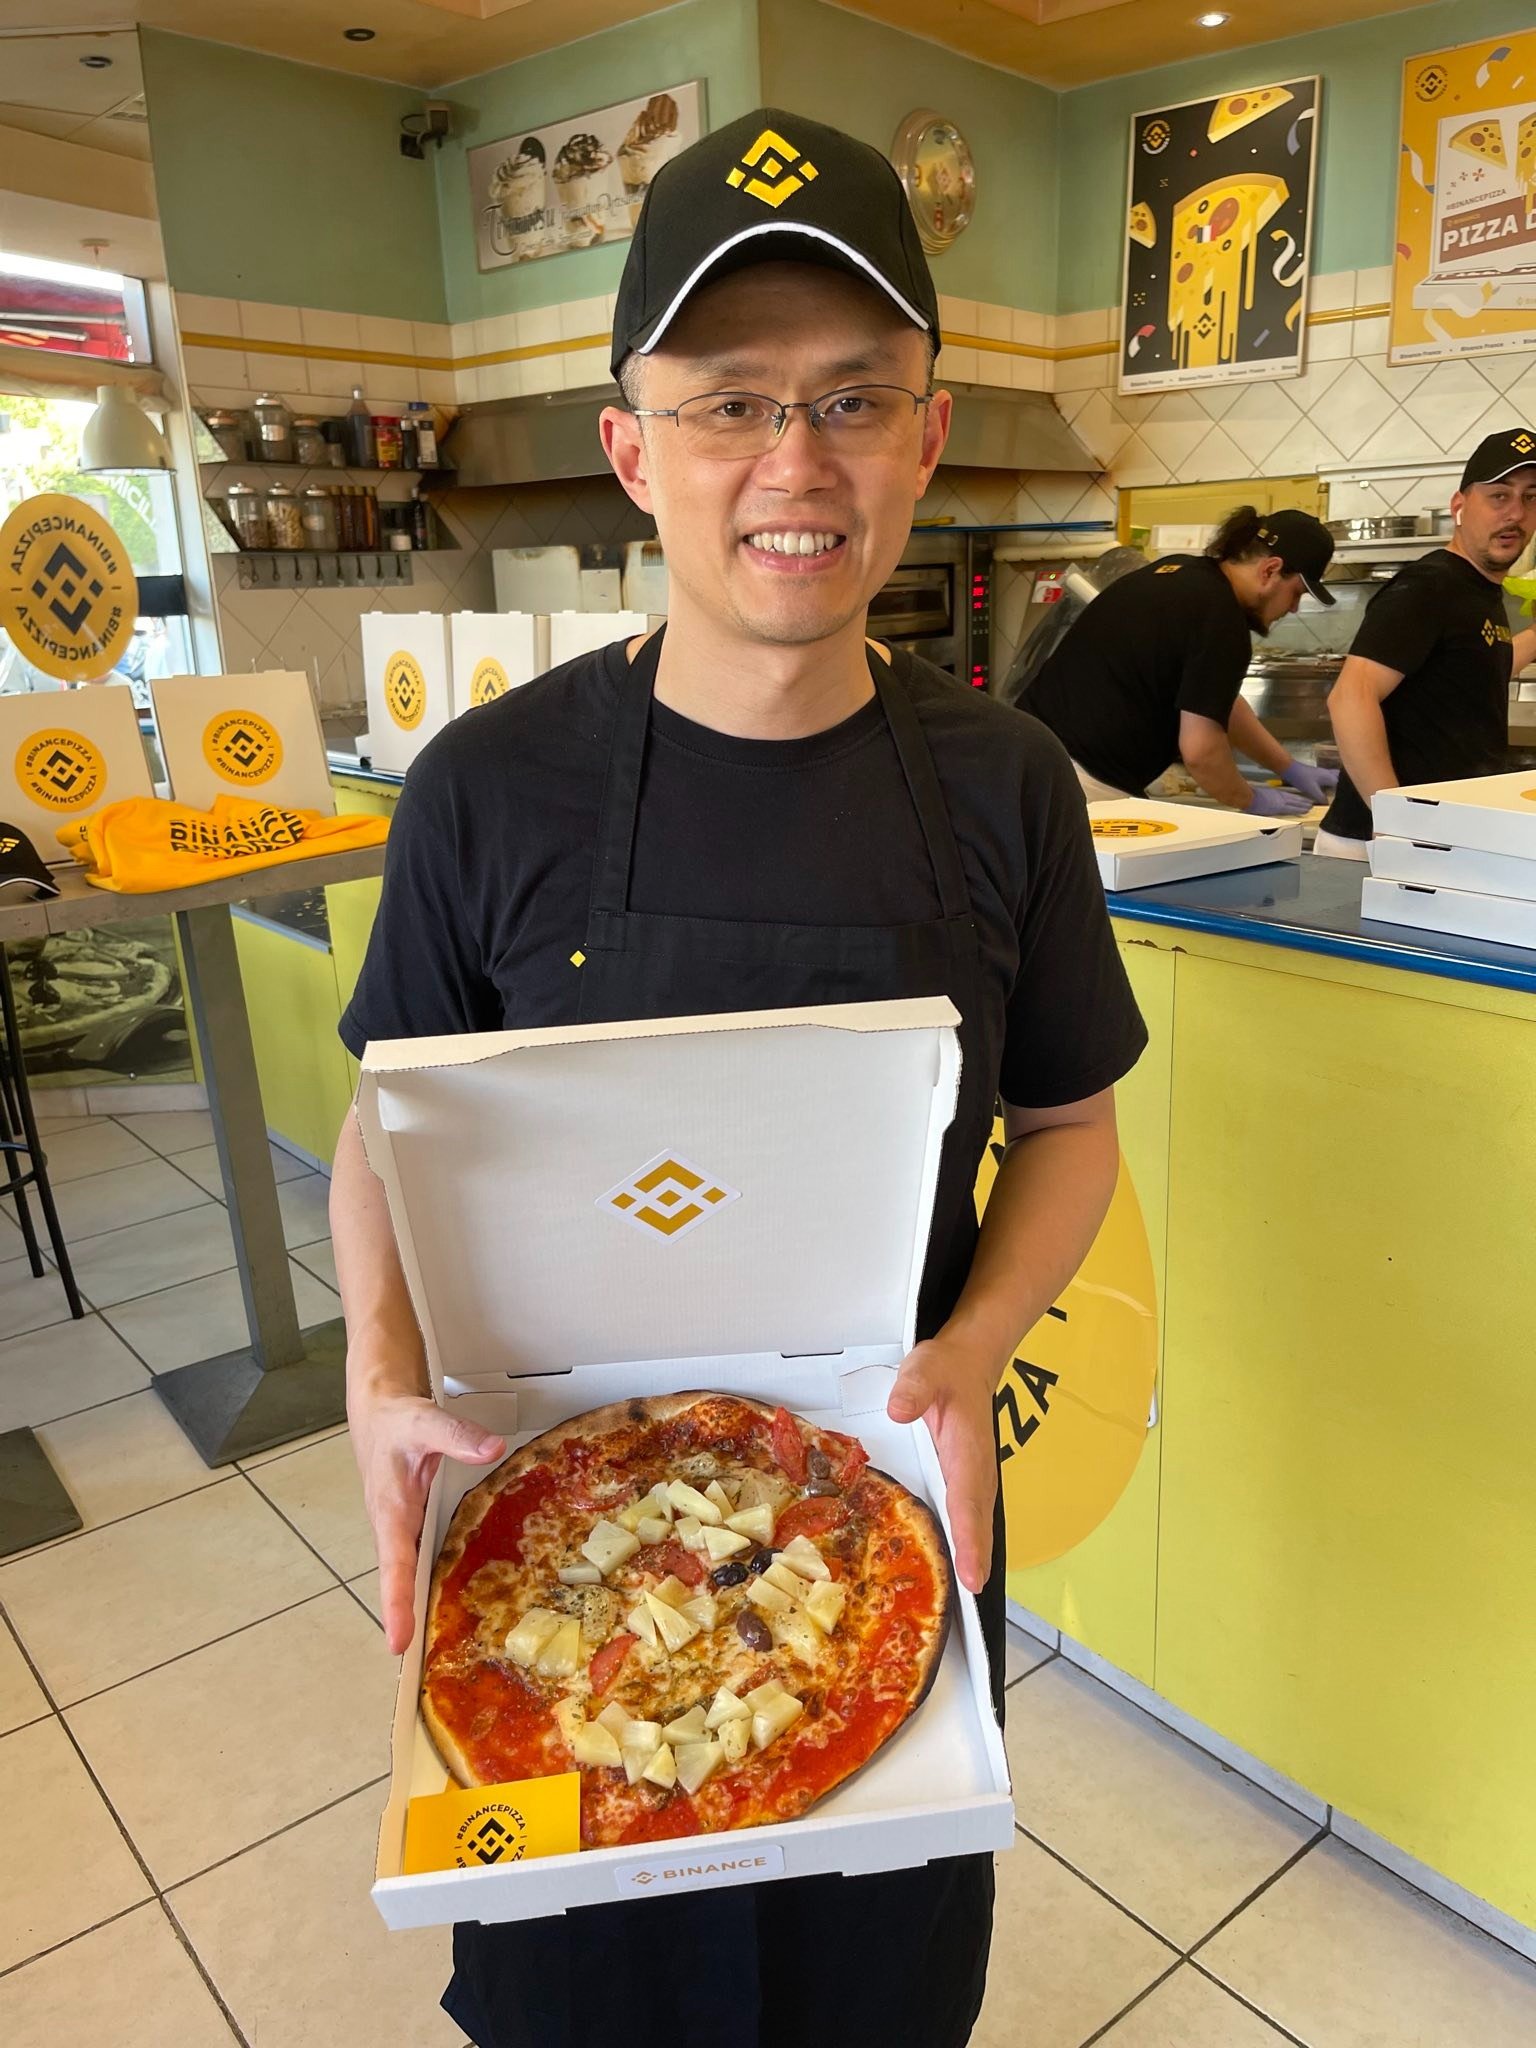 Changpeng Zhao on Happy Pizza Day, May 2022